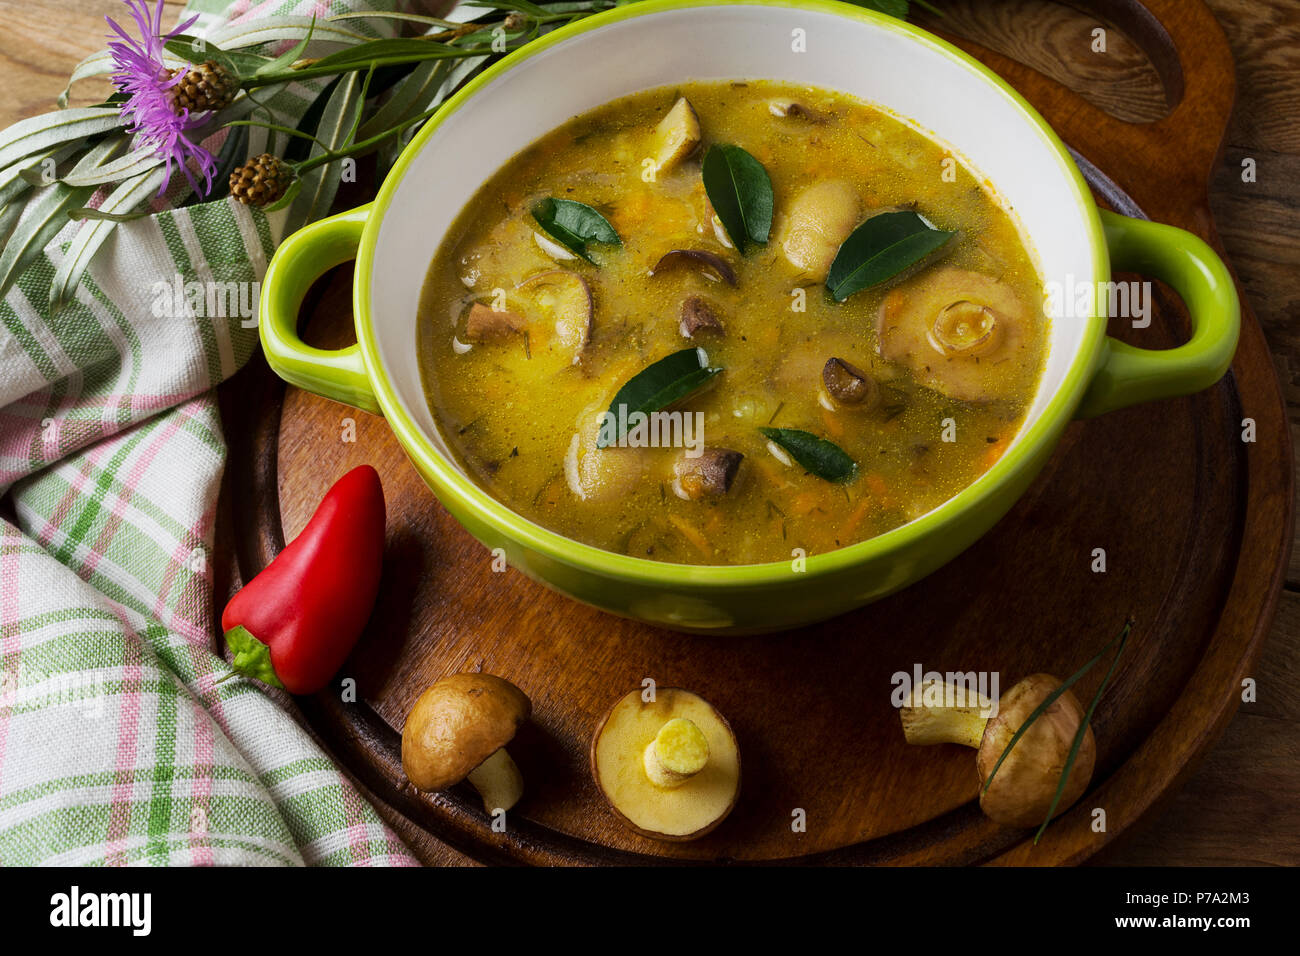 Mushroom vegetable soup in the green rustic bowl on the wooden table, close up. Vegetarian healthy food Stock Photo